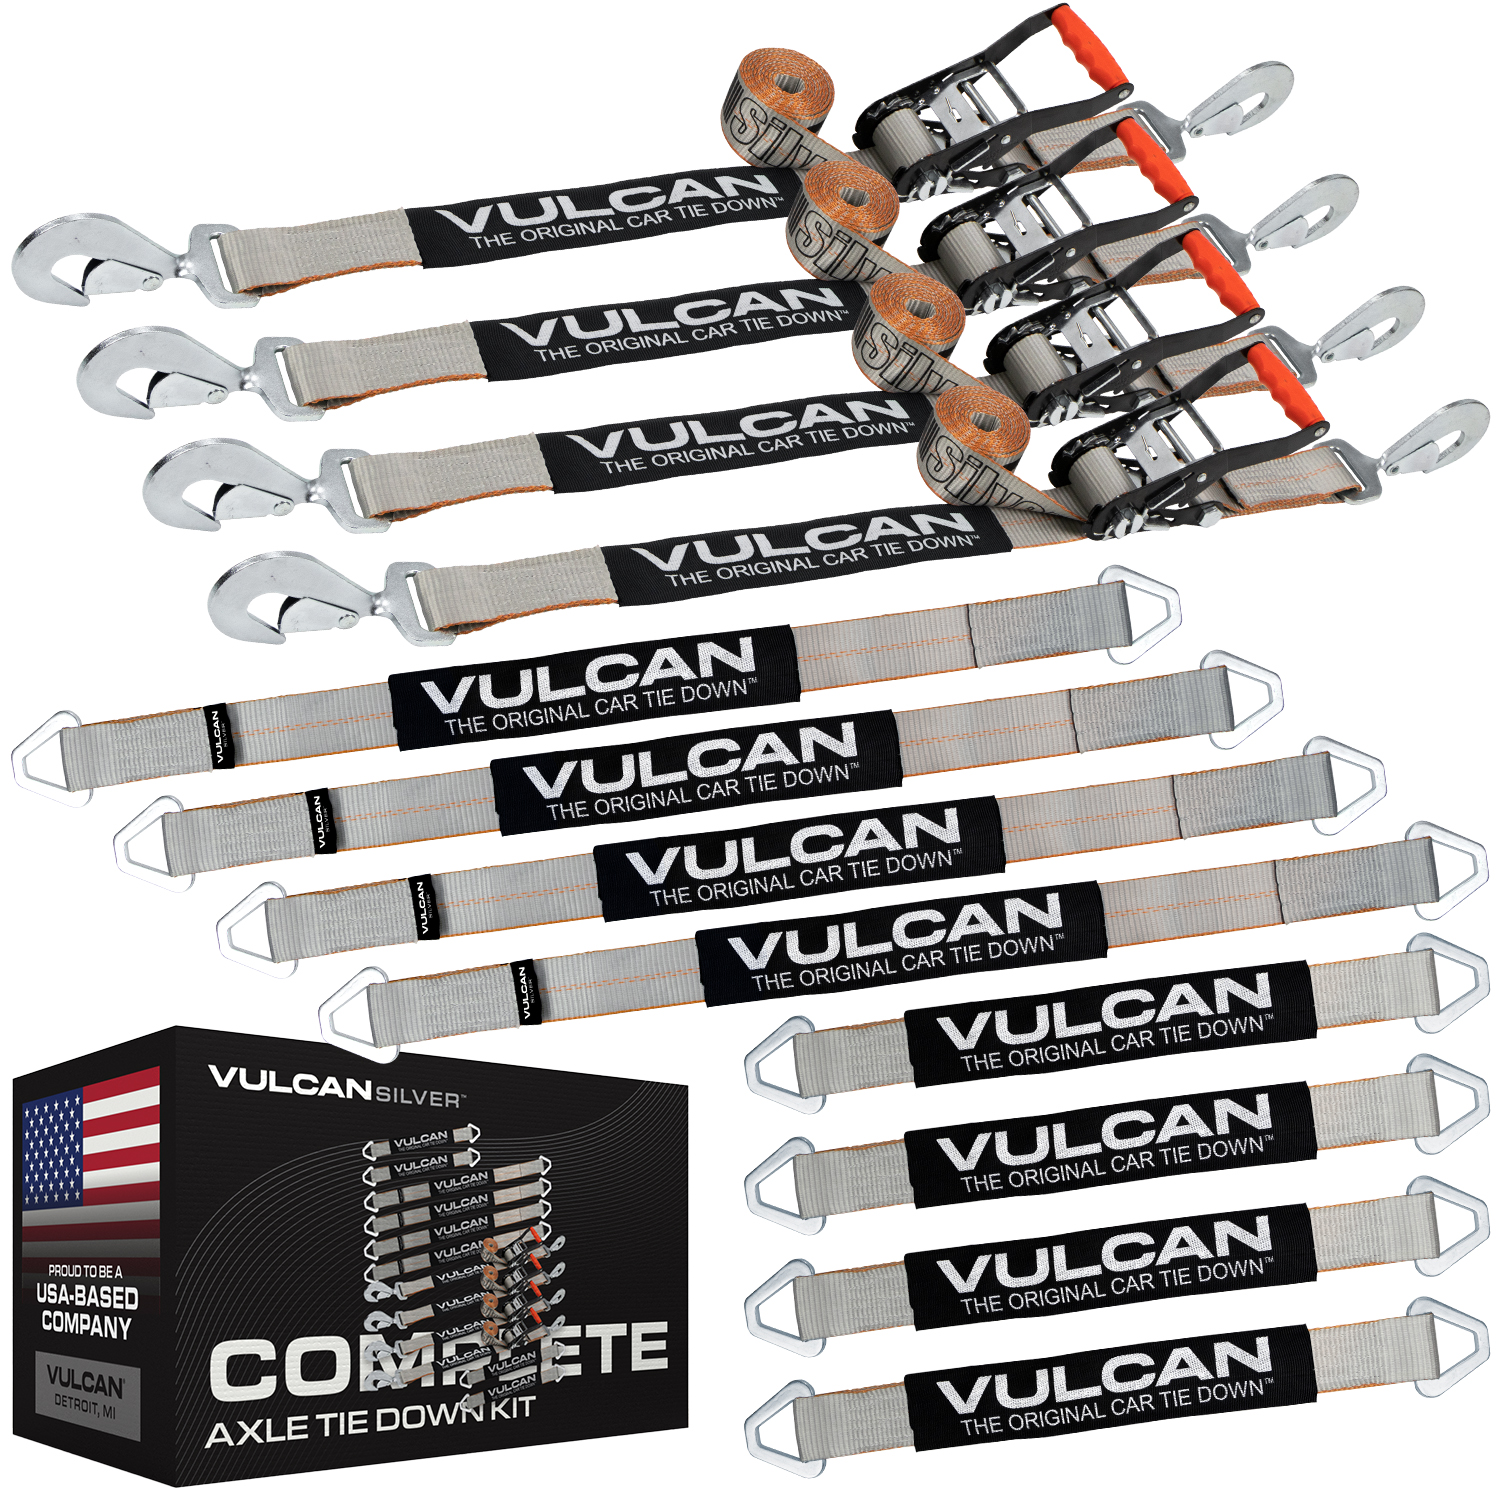 VULCAN Complete Axle Strap Tie Down Kits with Snap Hook Ratchet Straps -  Include (4) 22 Inch Axle Straps, (4) 36 Inch Axle Straps, and (4) 8' Snap  Hook Ratchet Straps